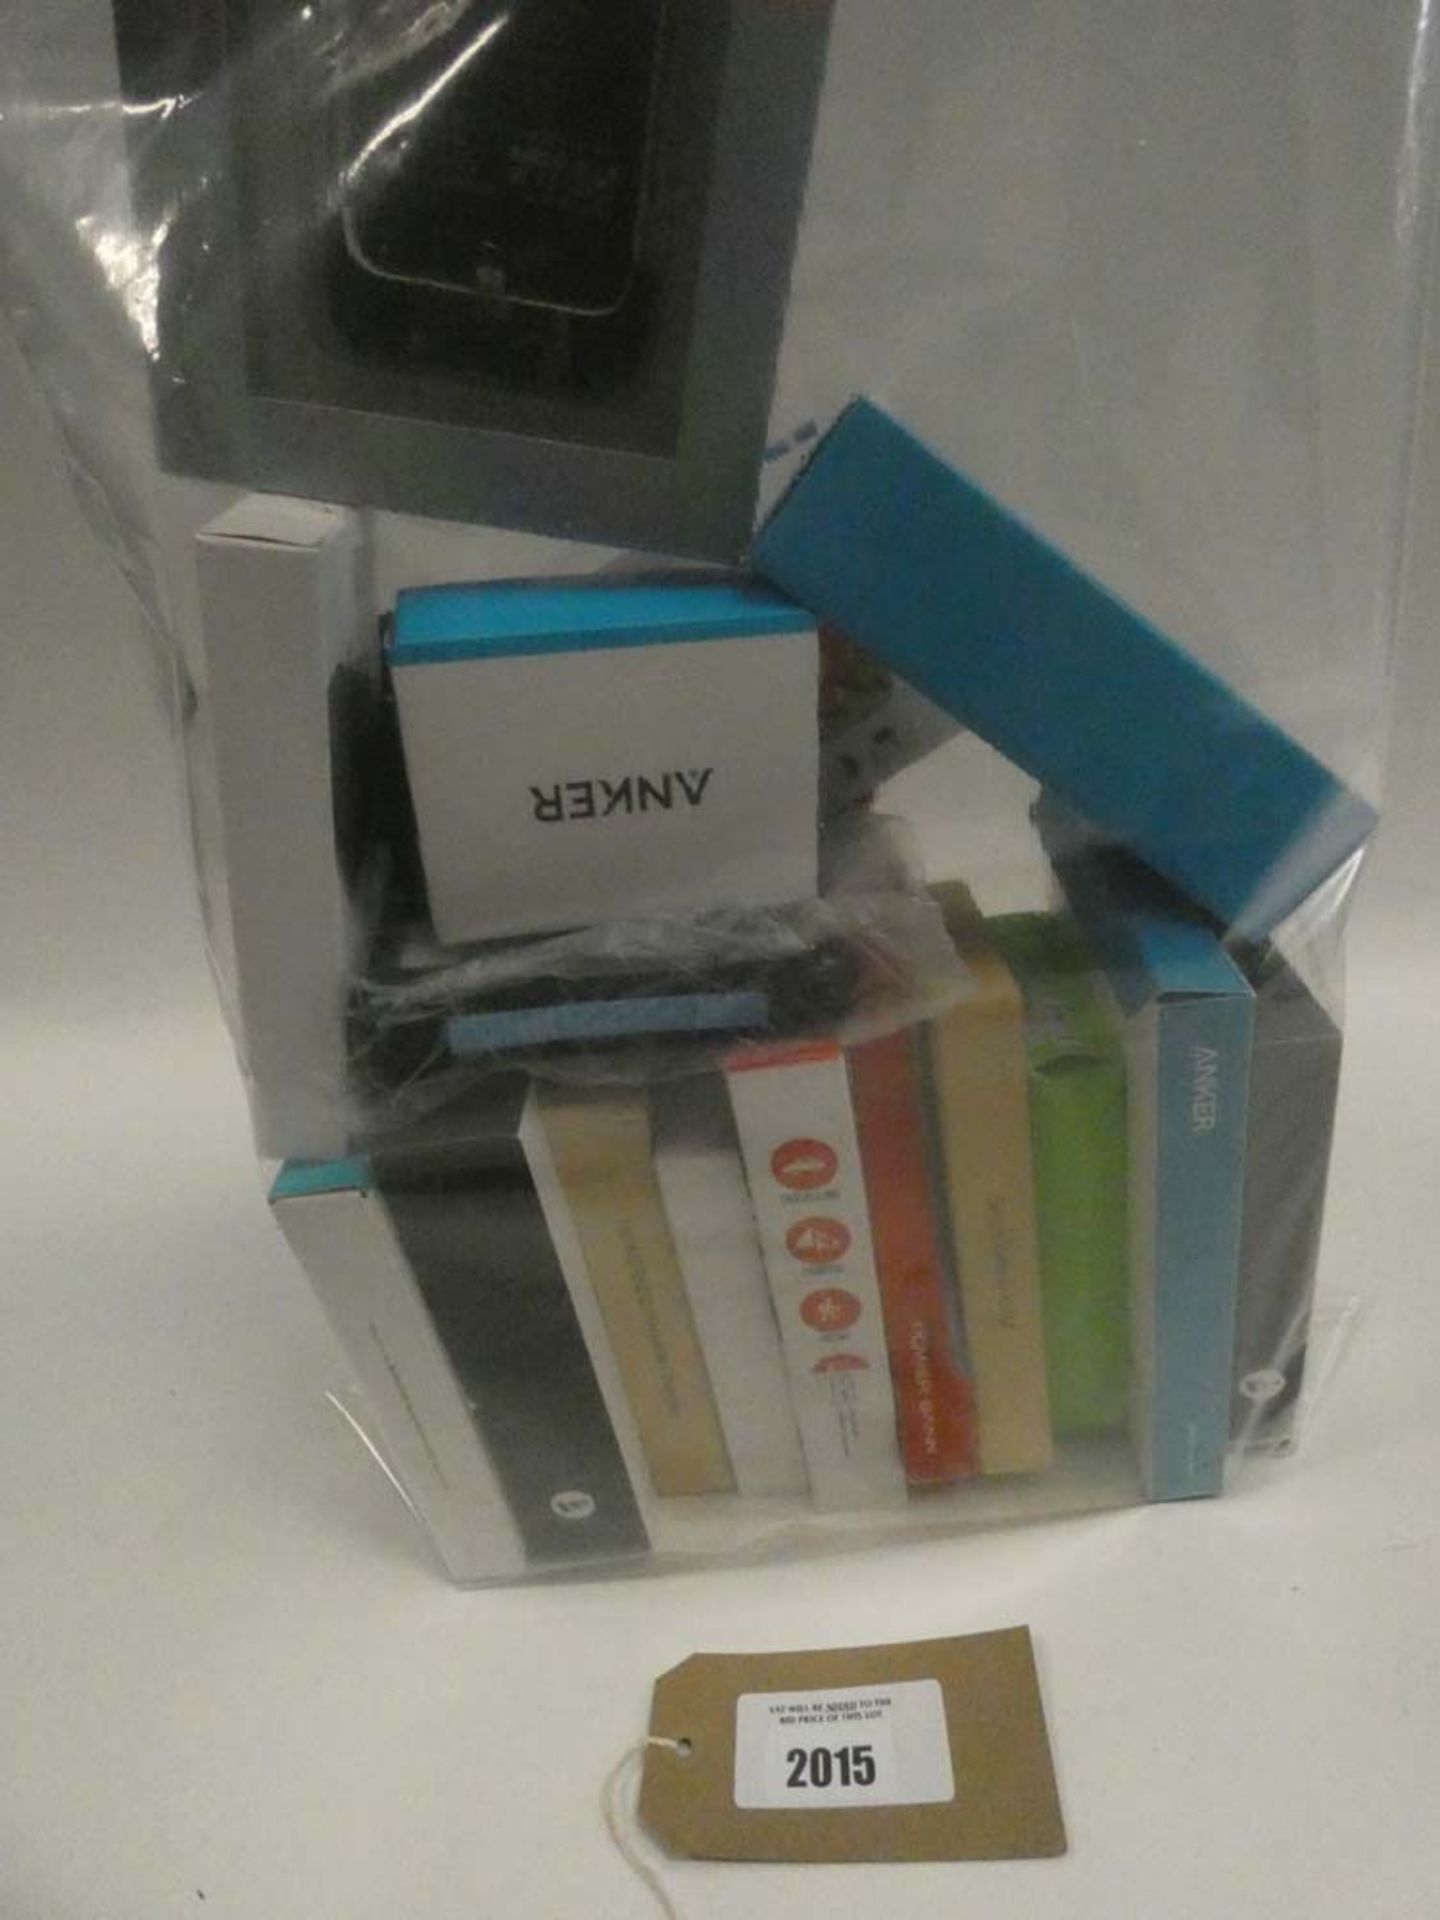 Bag containing quantity of various portable power banks